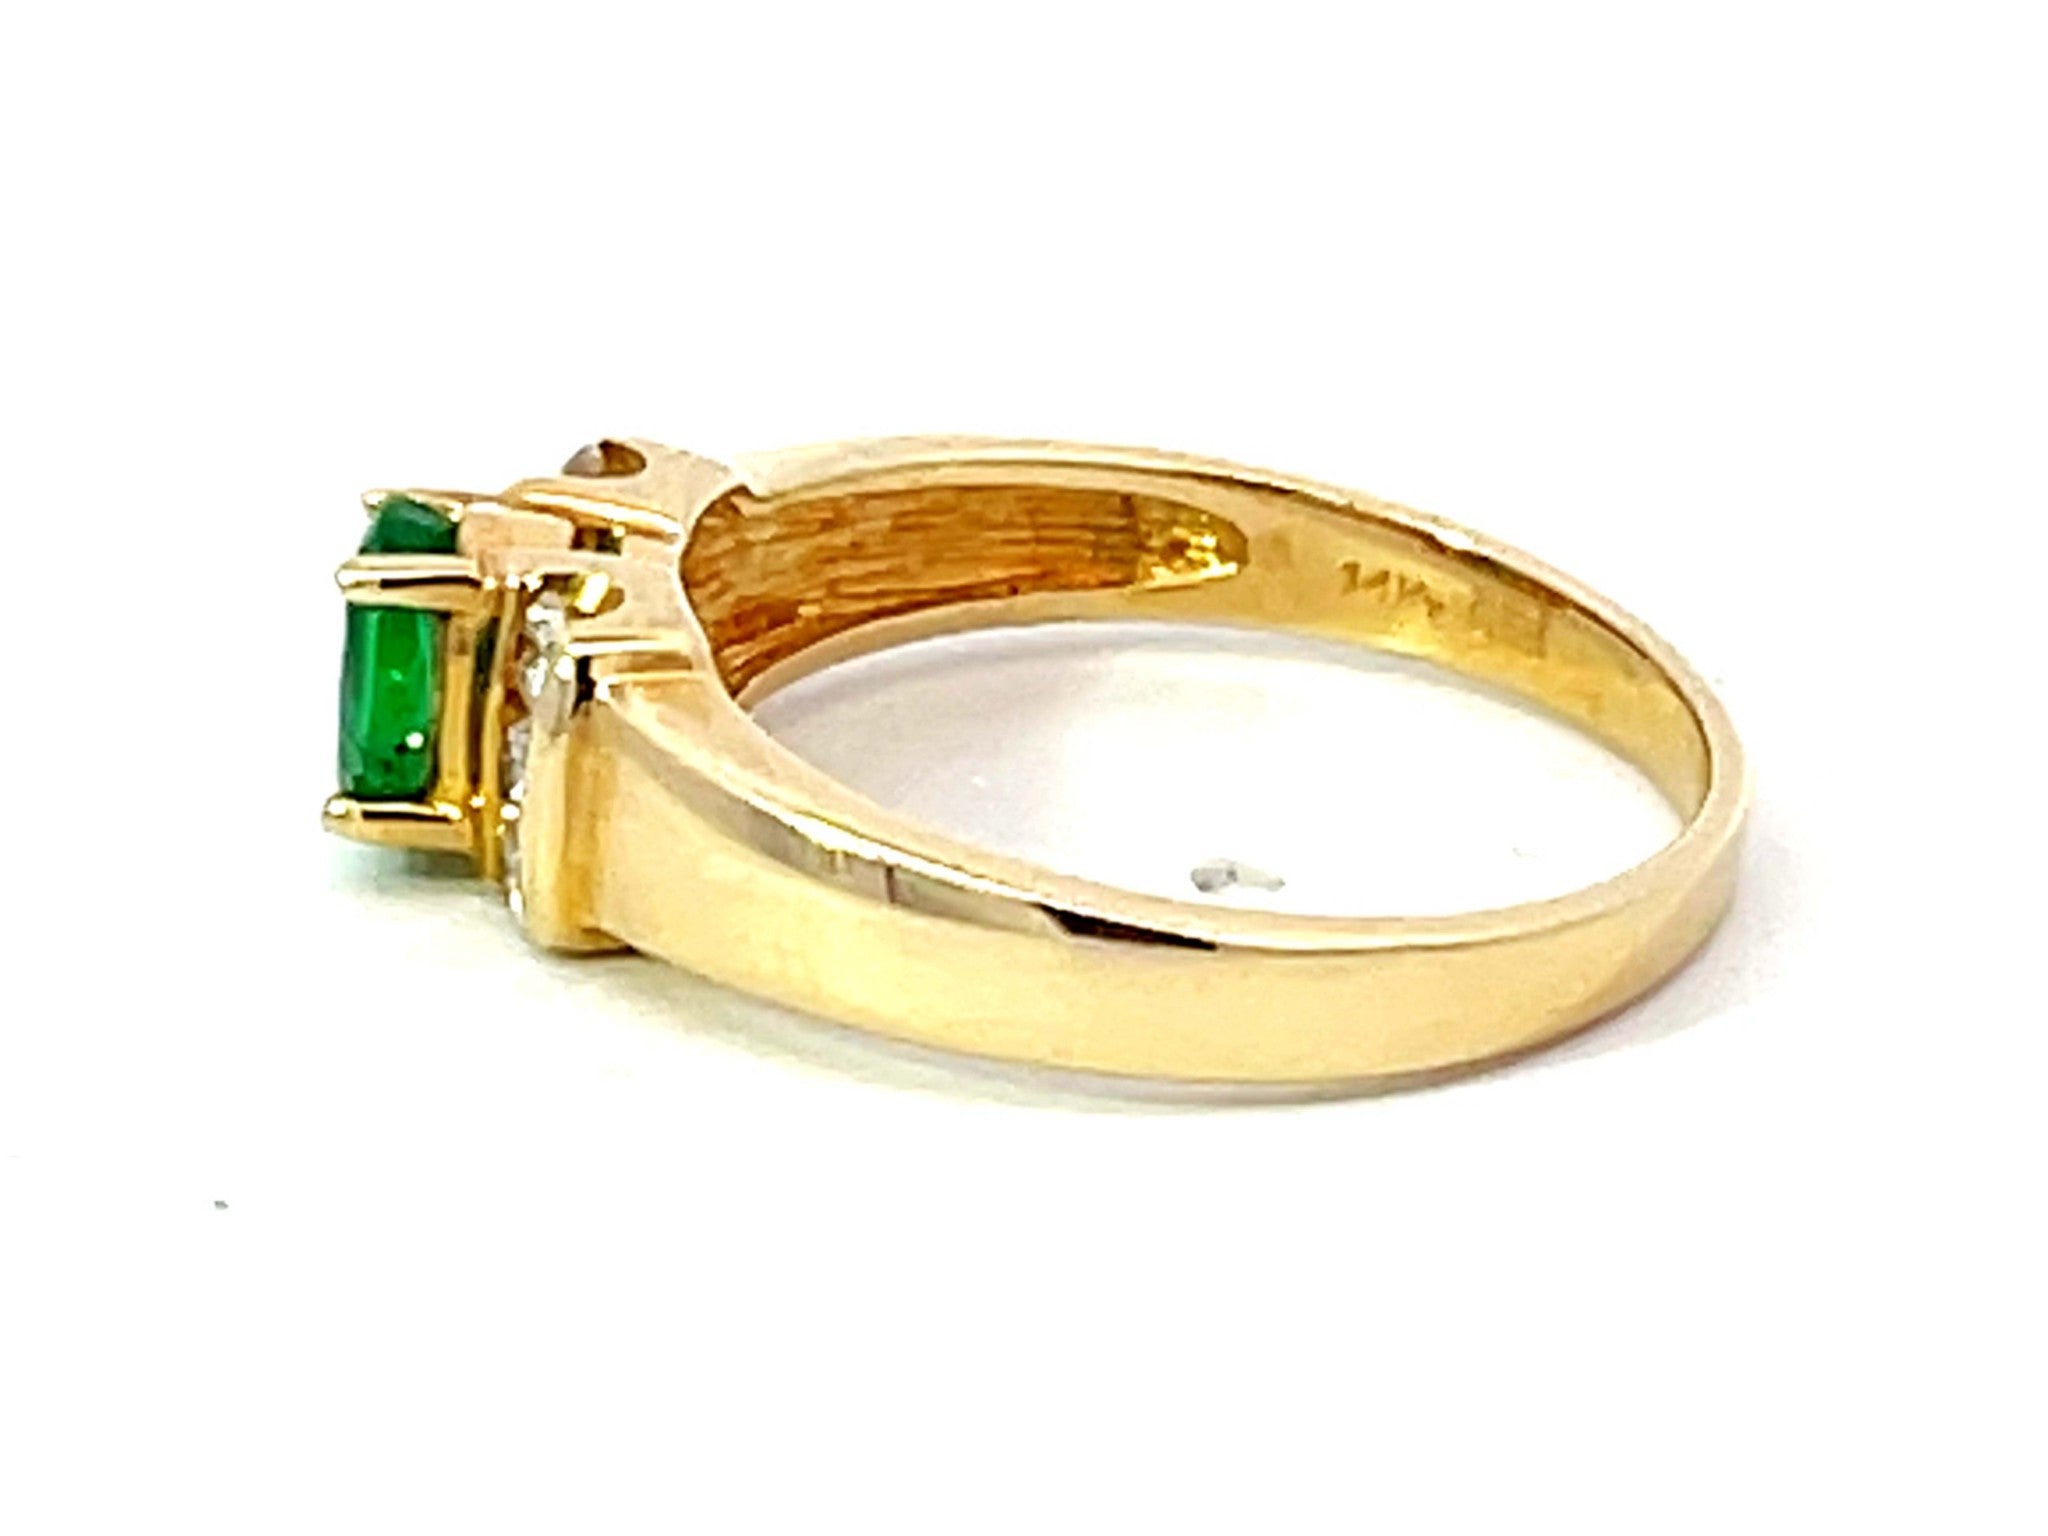 Oval Green Emerald and 6 Diamond Stackable Ring in 14k Yellow Gold